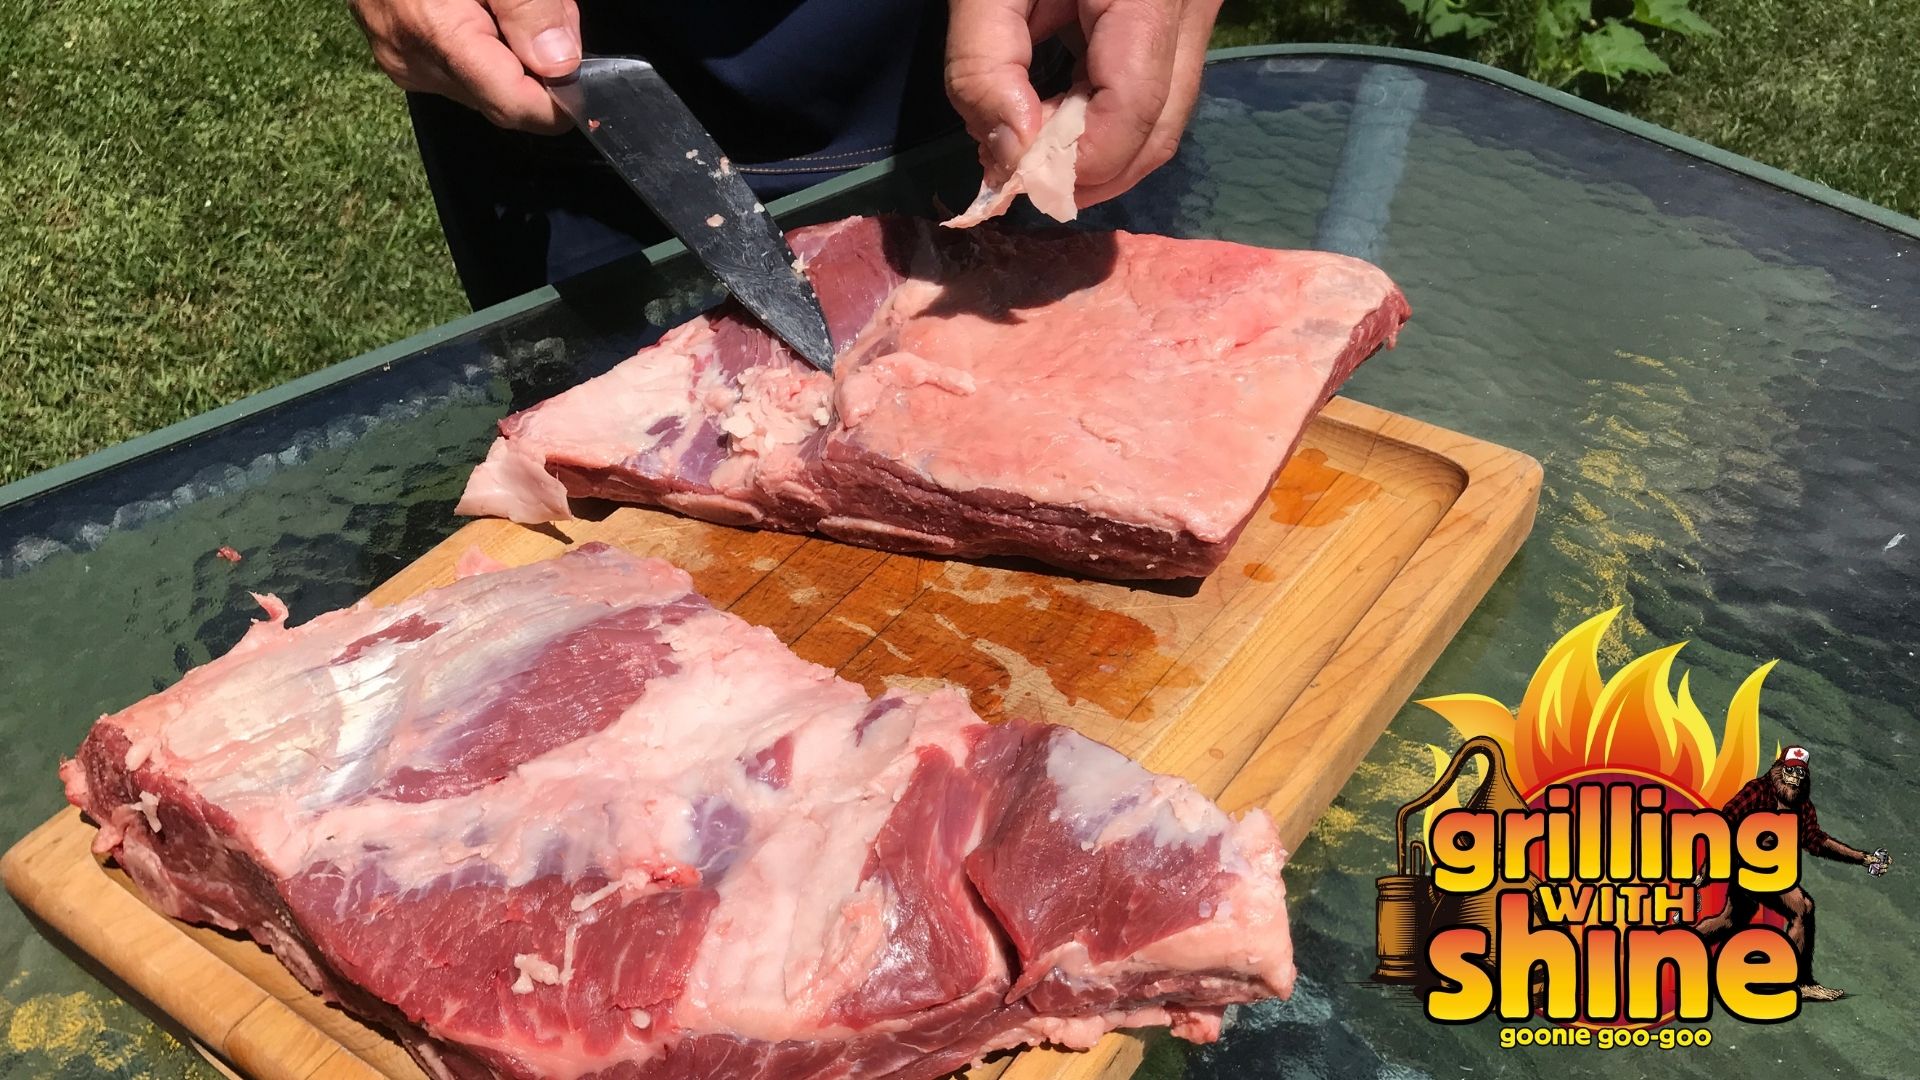 trimming beef ribs